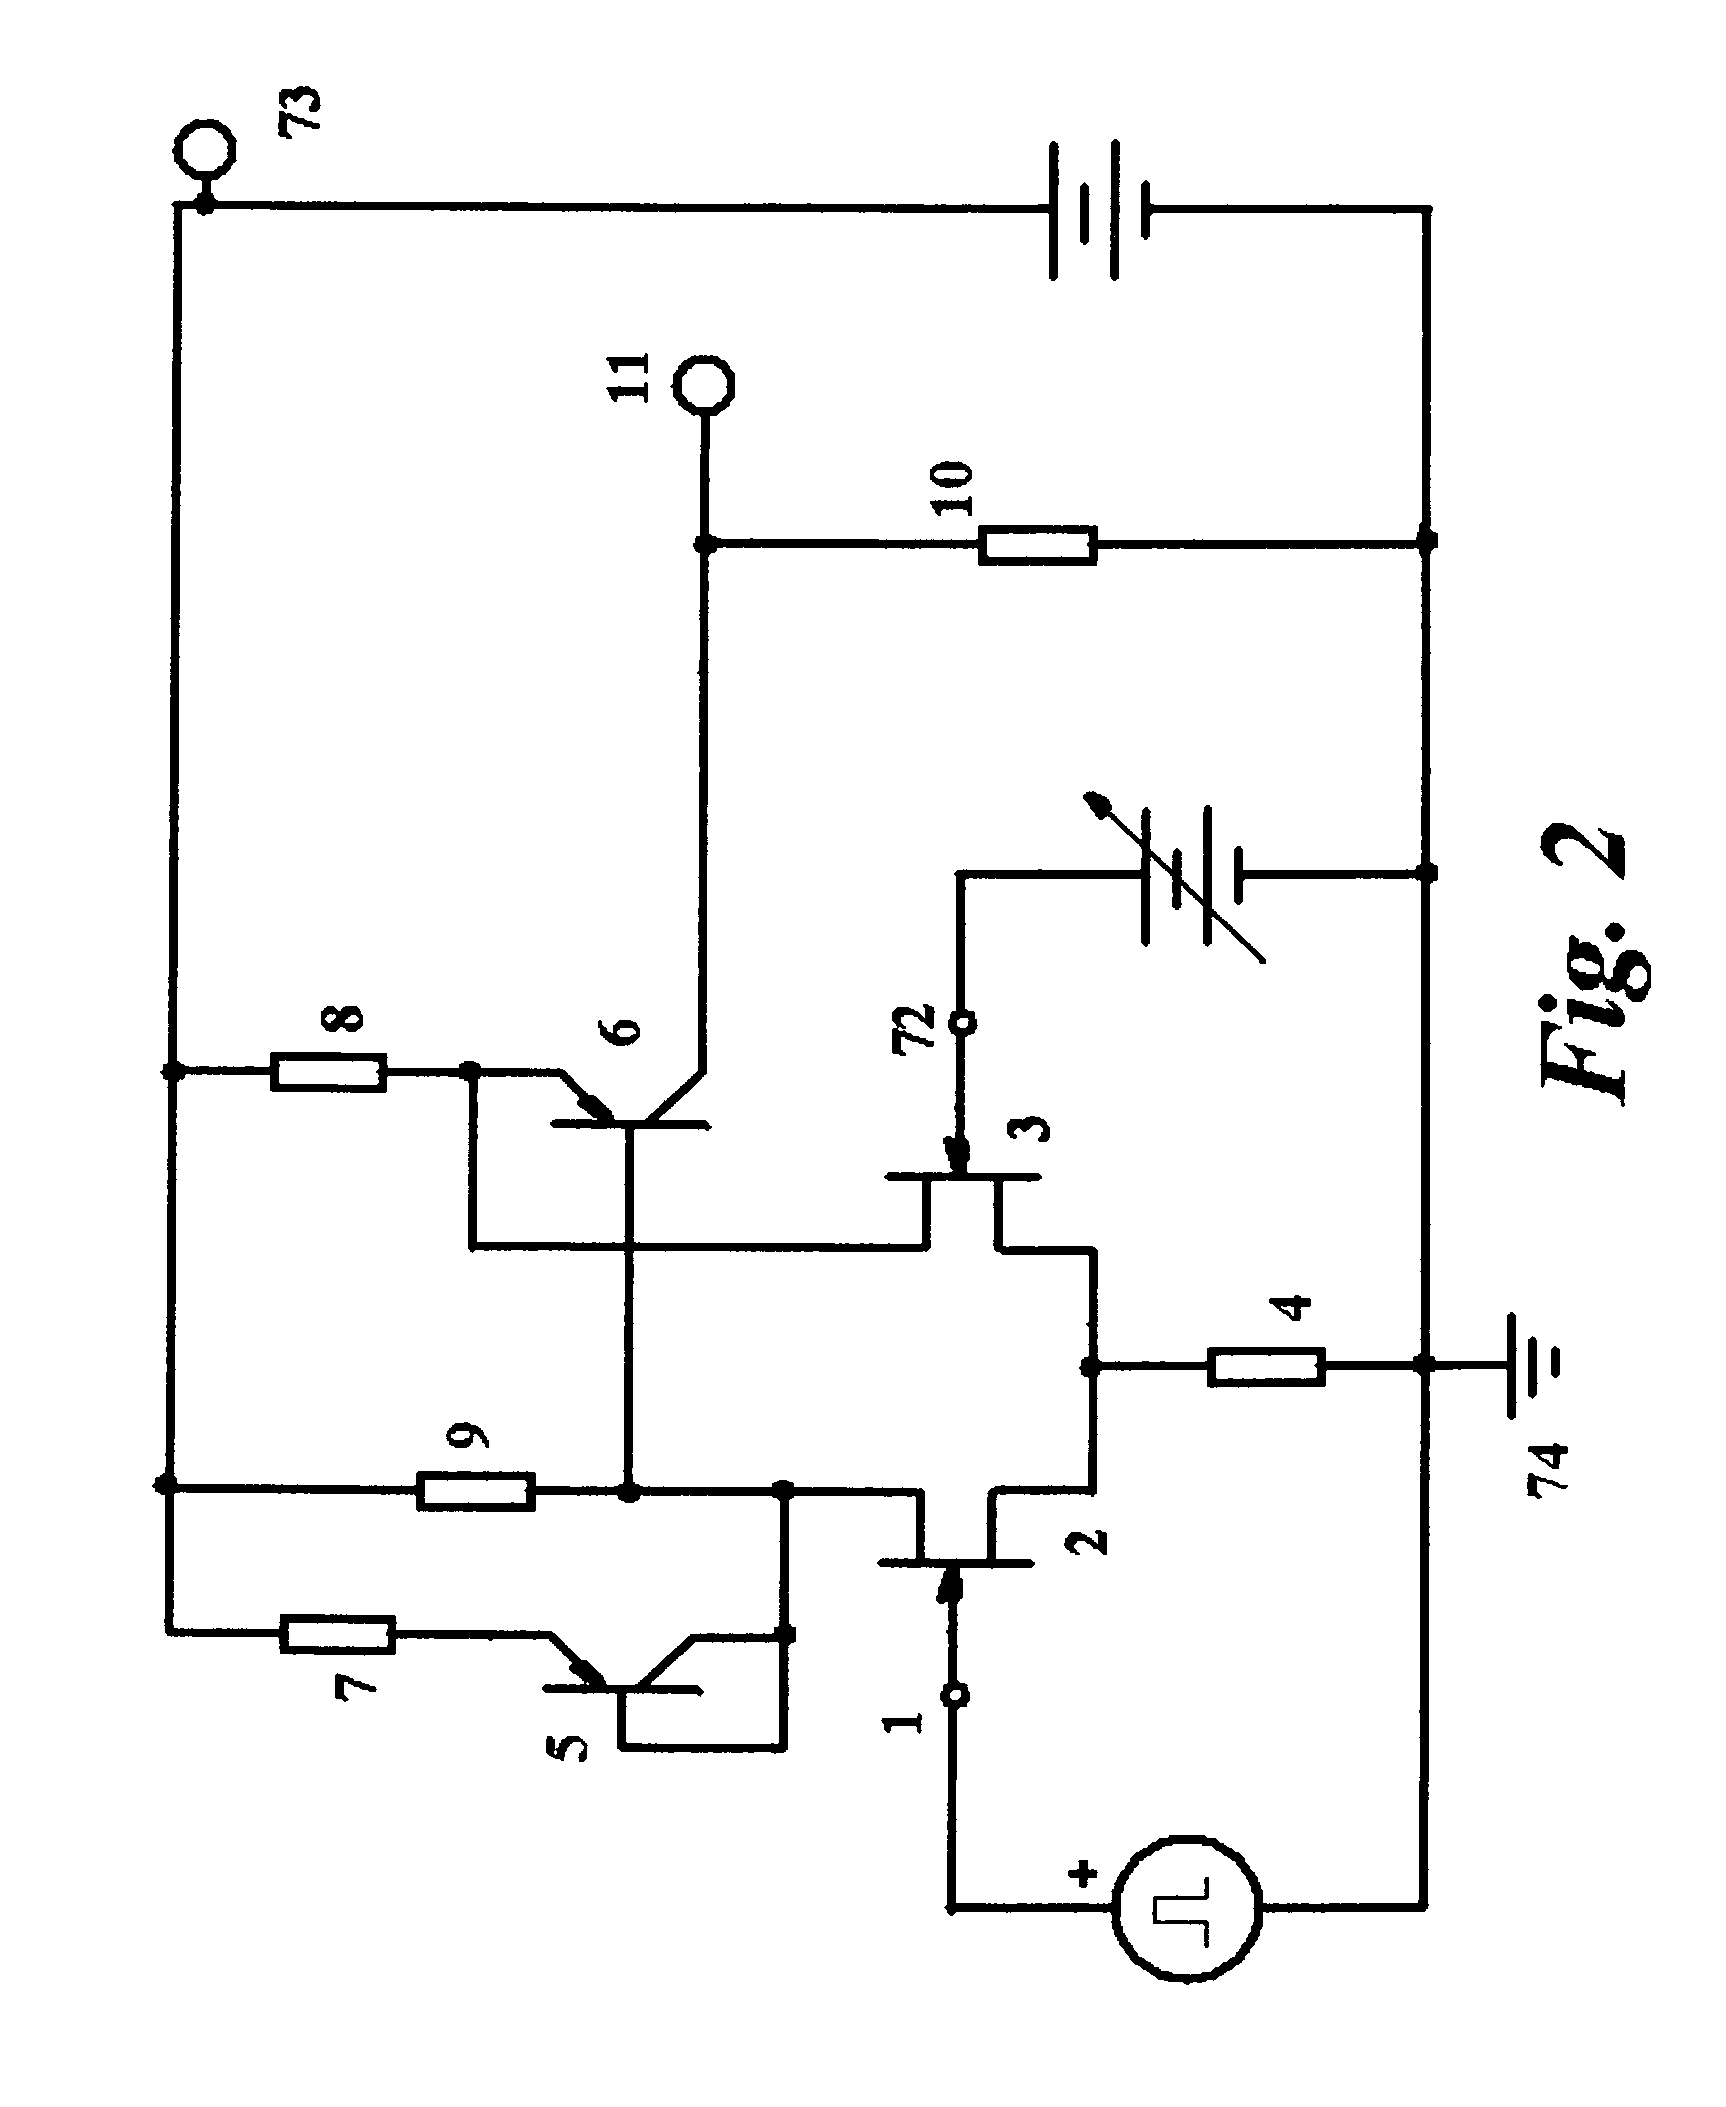 Apparatus for extending a scintillation detector's dynamic range